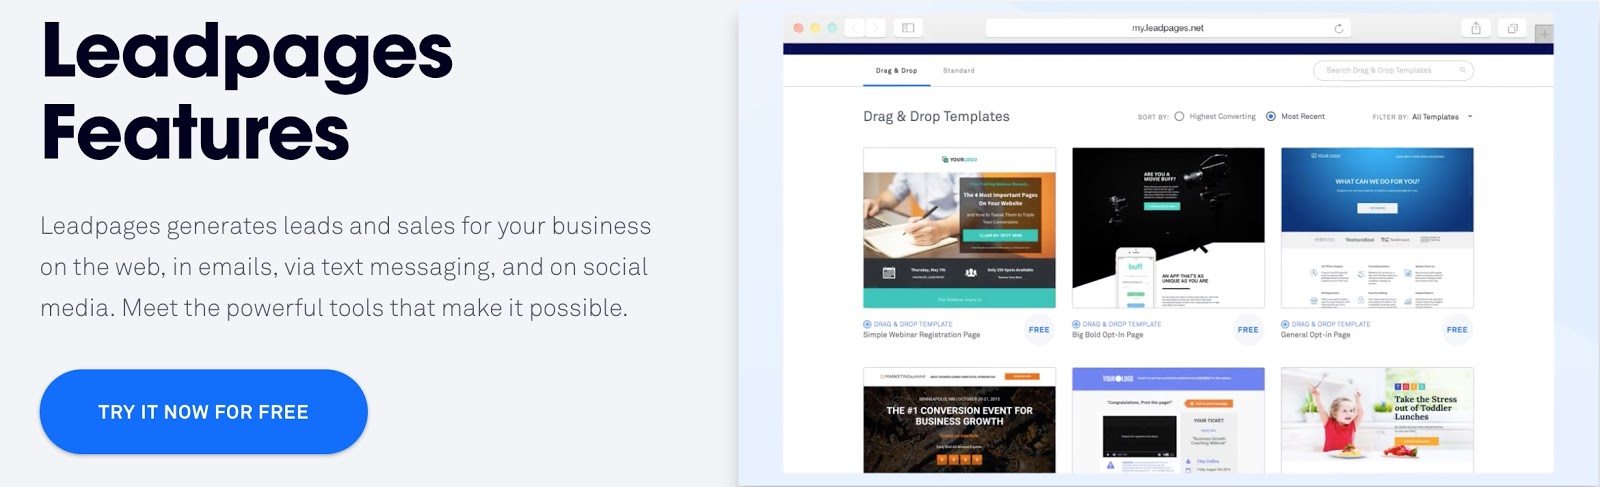 Leadpages - a powerful Email Marketing Plugin for WordPress